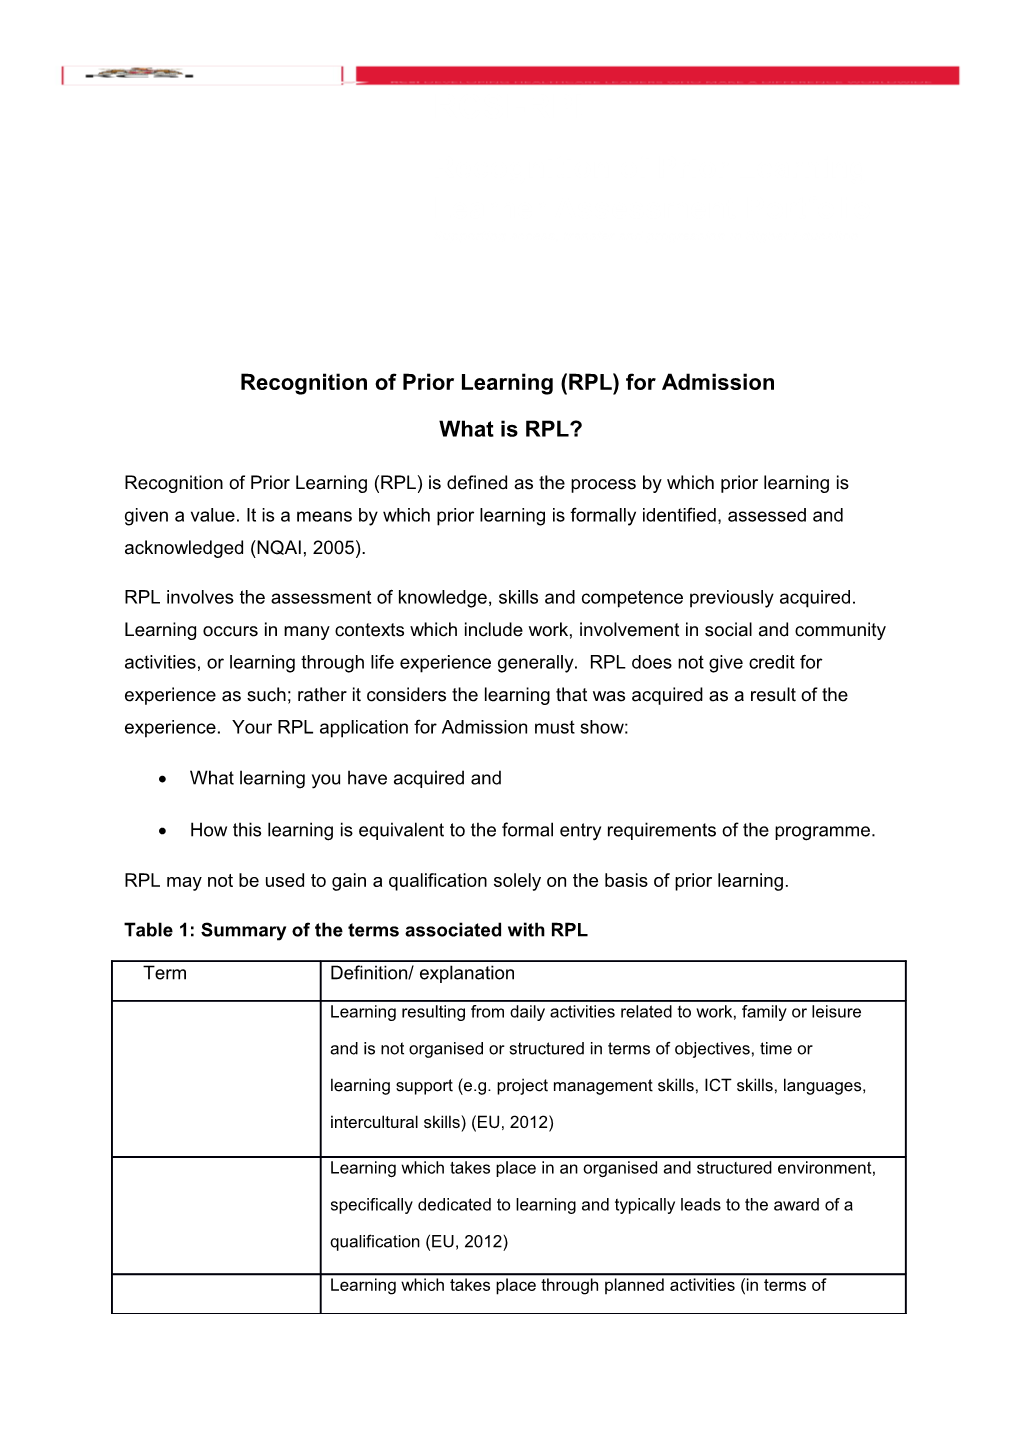 Recognition of Prior Learning (RPL) for Admission